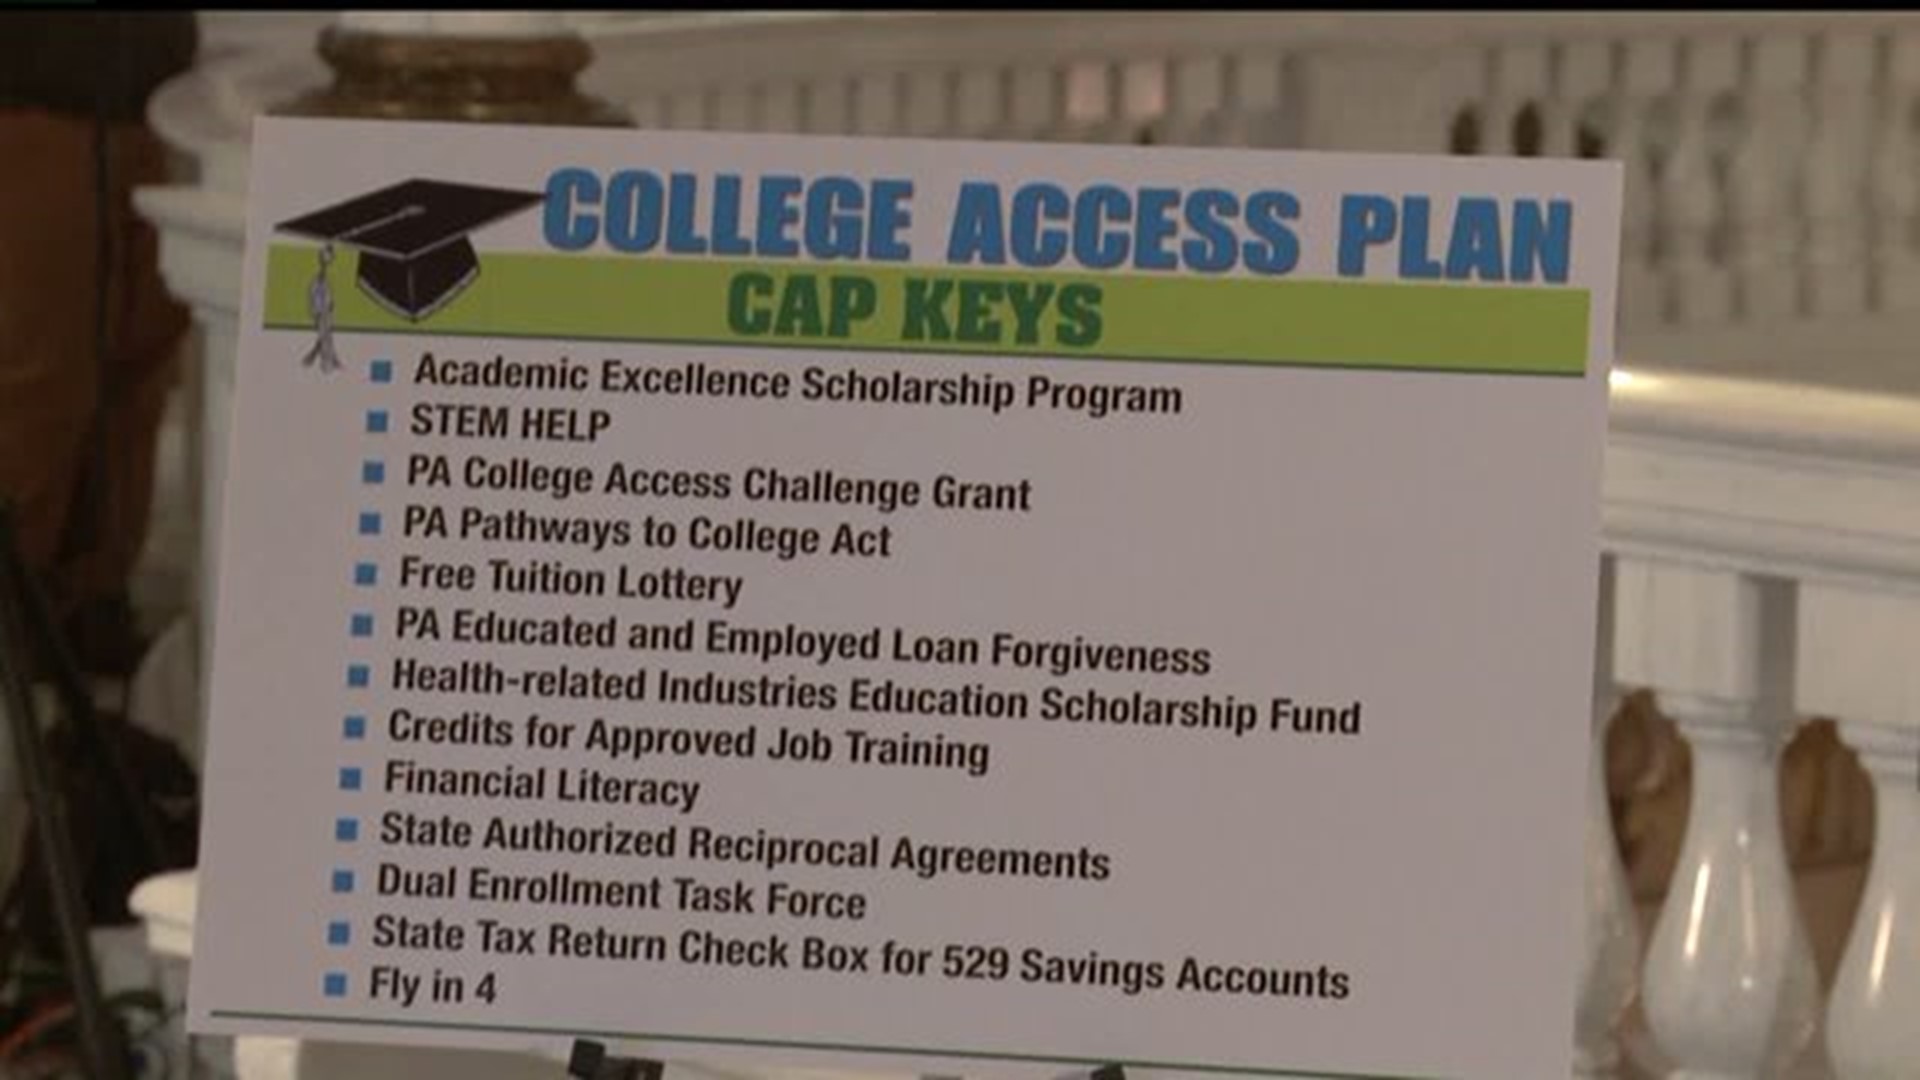 Bills proposed to lower costs for students in Harrisburg